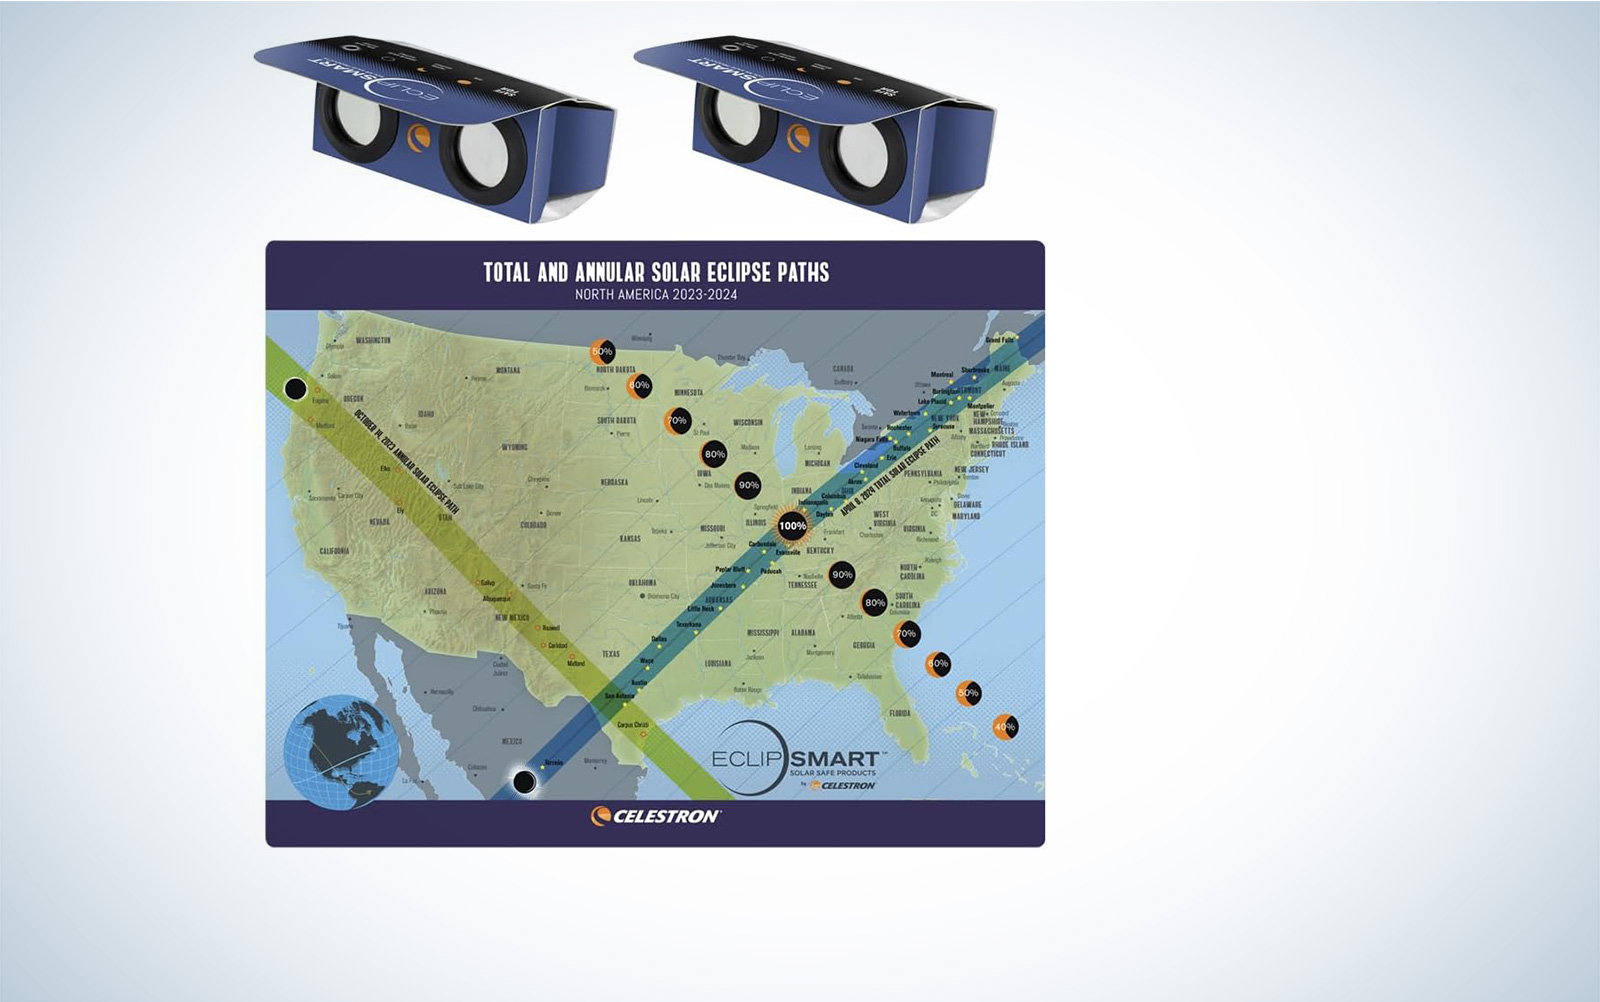 Celestron 2x magnification eclipse glasses with the map